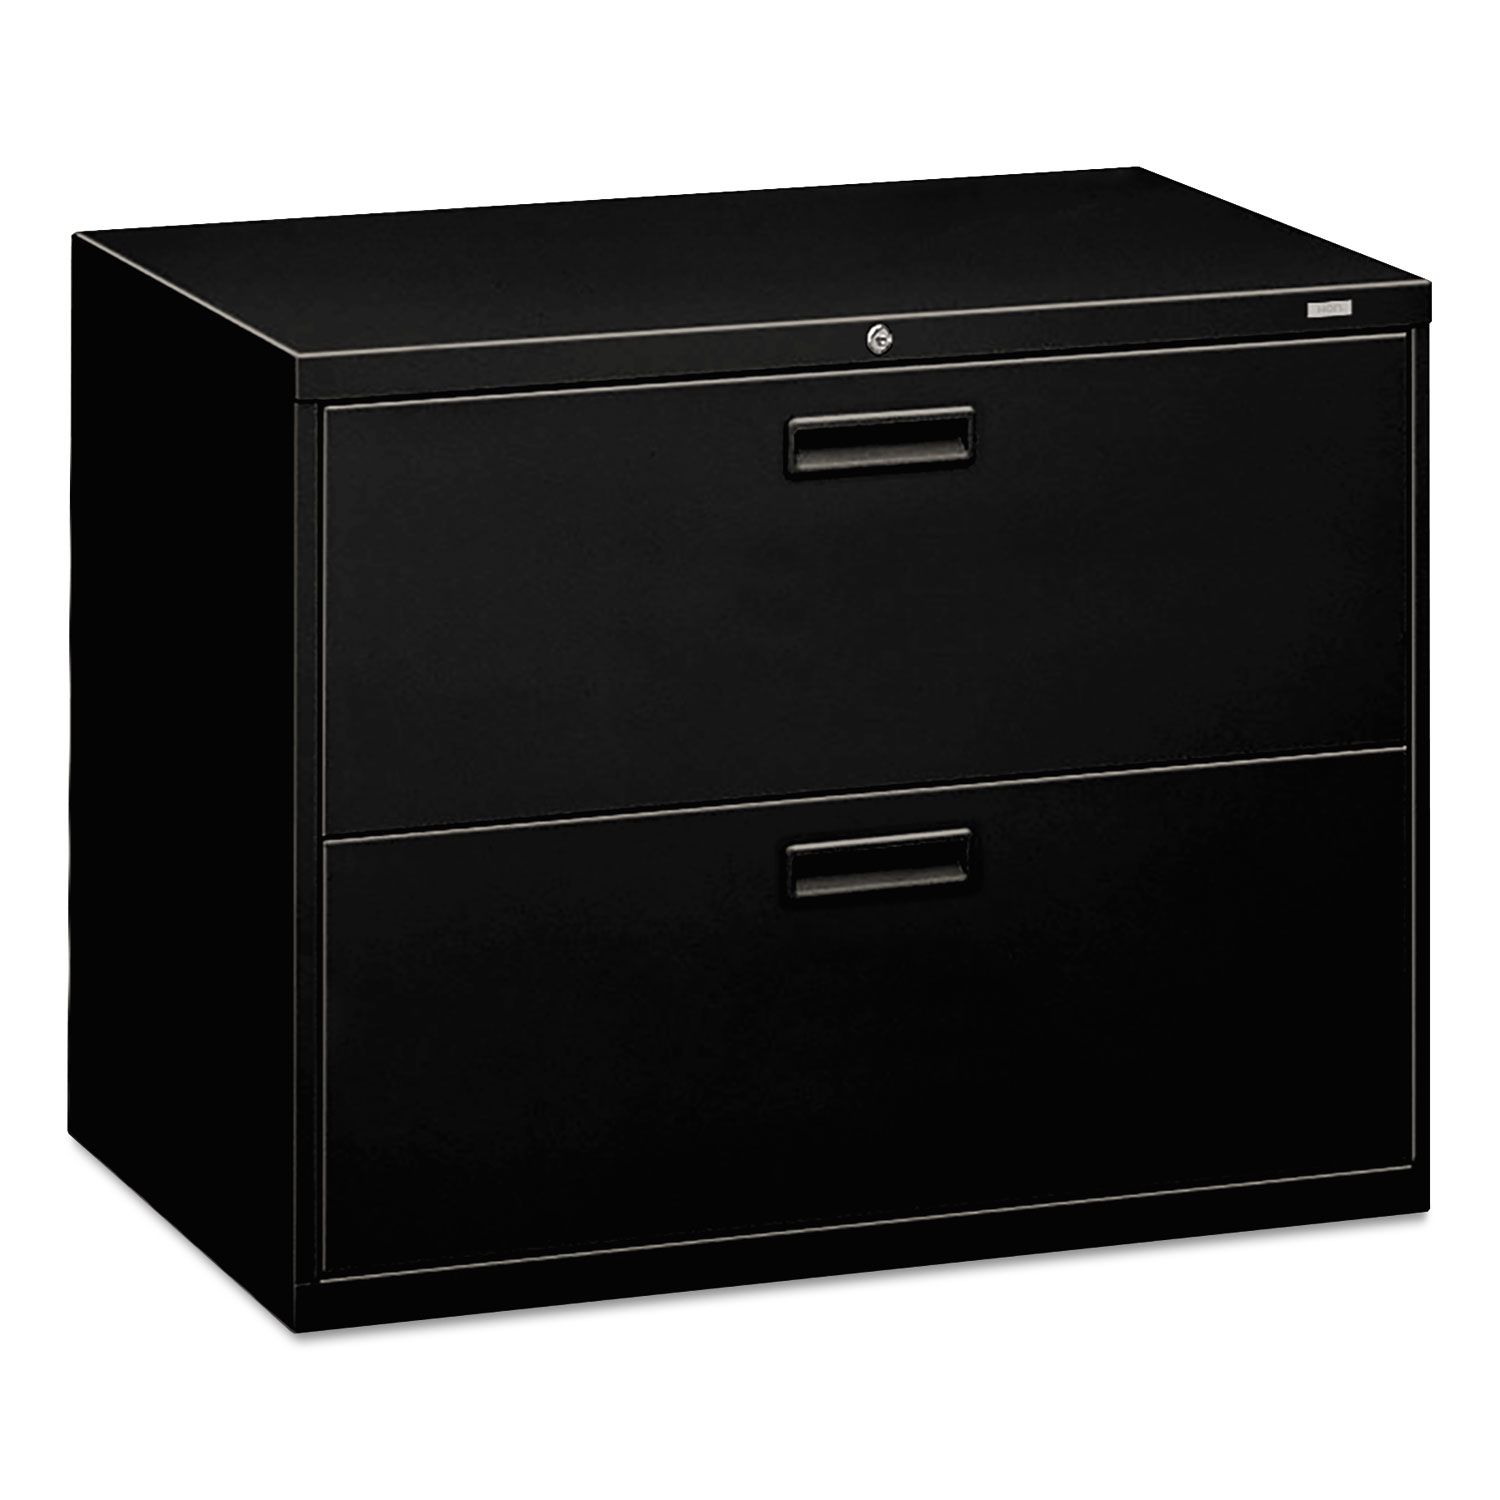 500 Series Two-Drawer Lateral File, 36w x 19-1/4d x 28-3/8h, Black